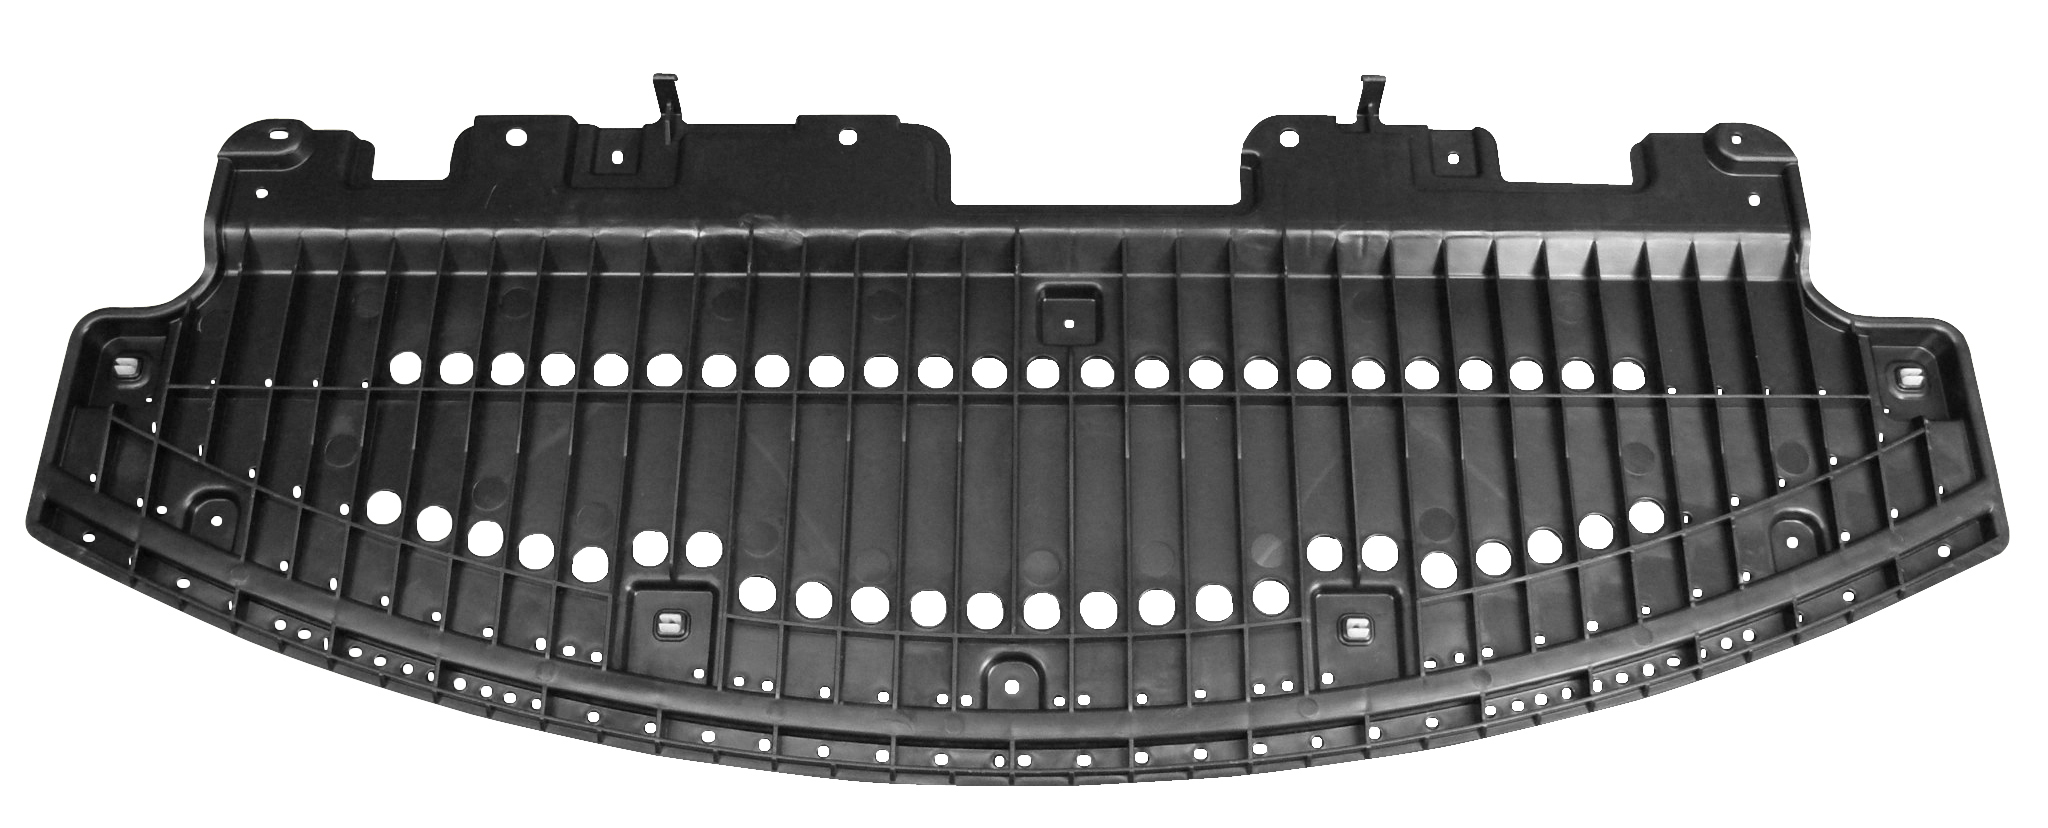 Aftermarket UNDER ENGINE COVERS for TOYOTA - COROLLA, COROLLA,14-16,Lower engine cover